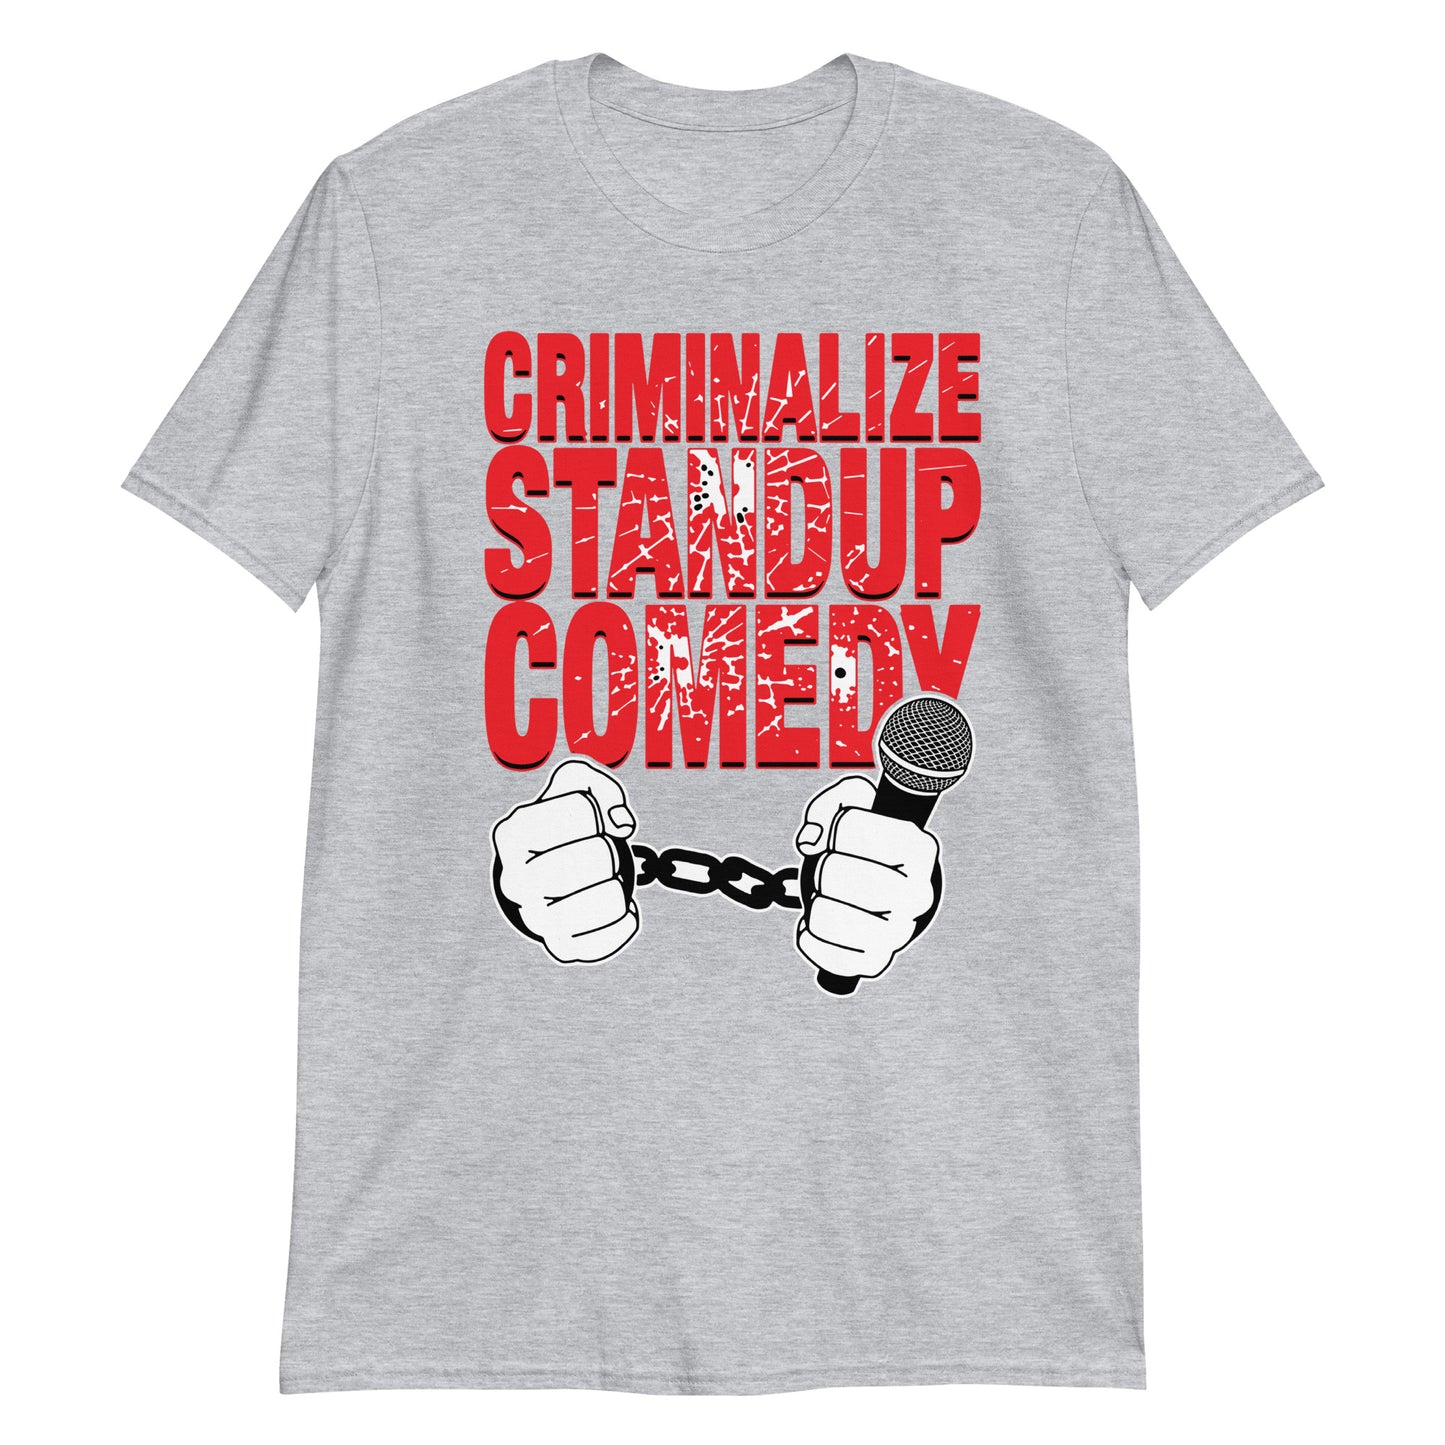 Criminalize stand-up comedy.